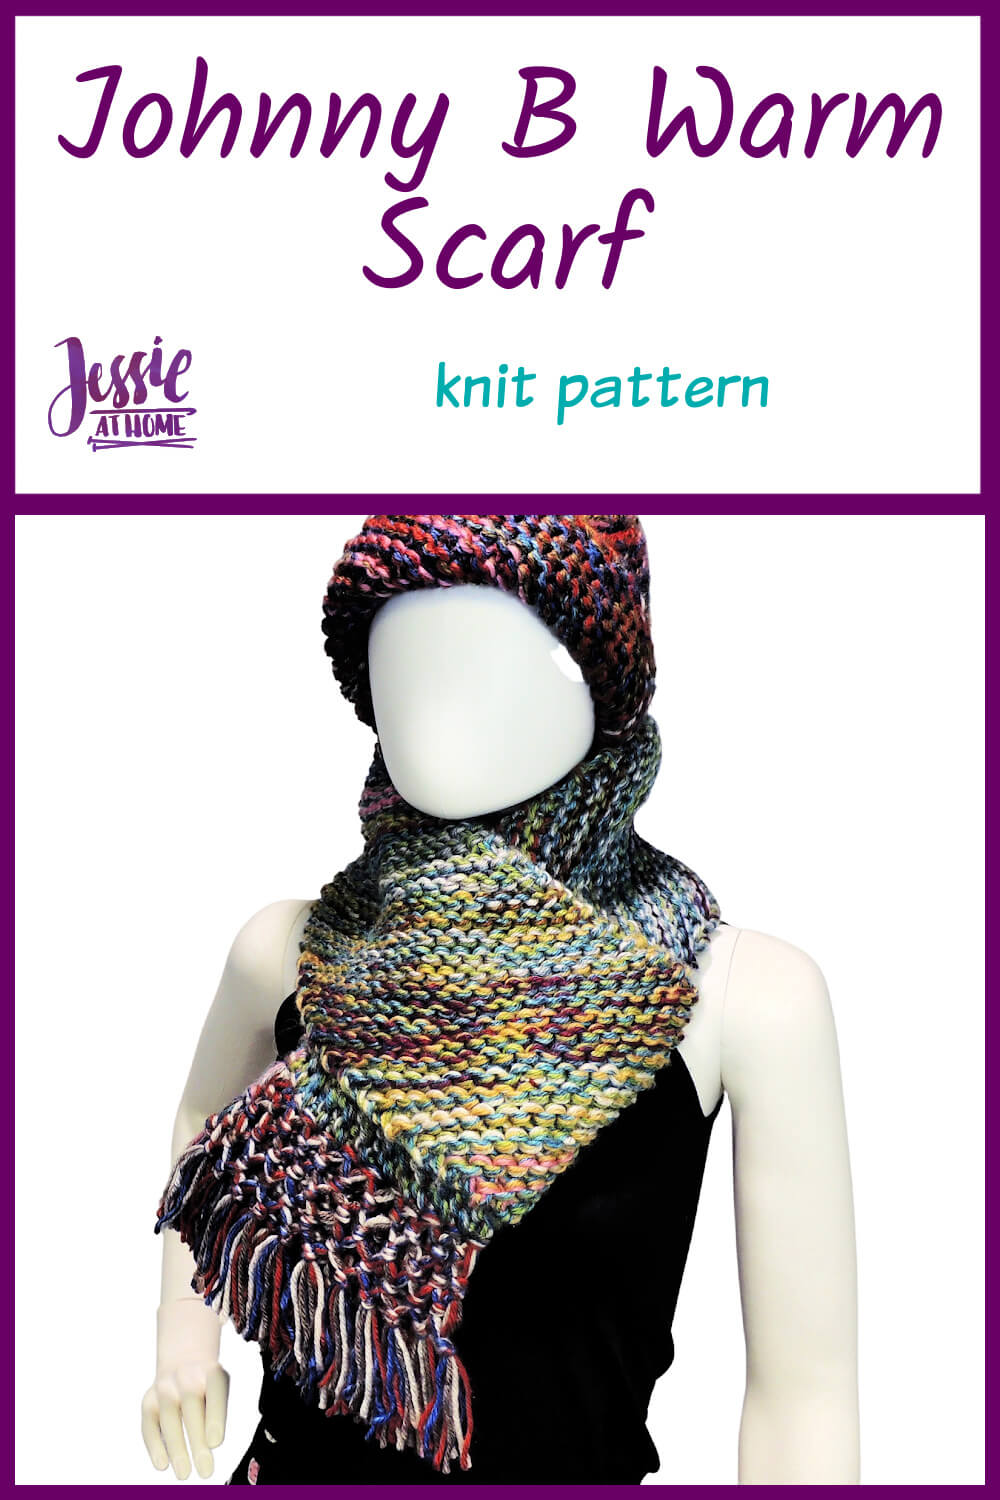 Johnny B Warm Scarf by Jessie At Home - Pin 1